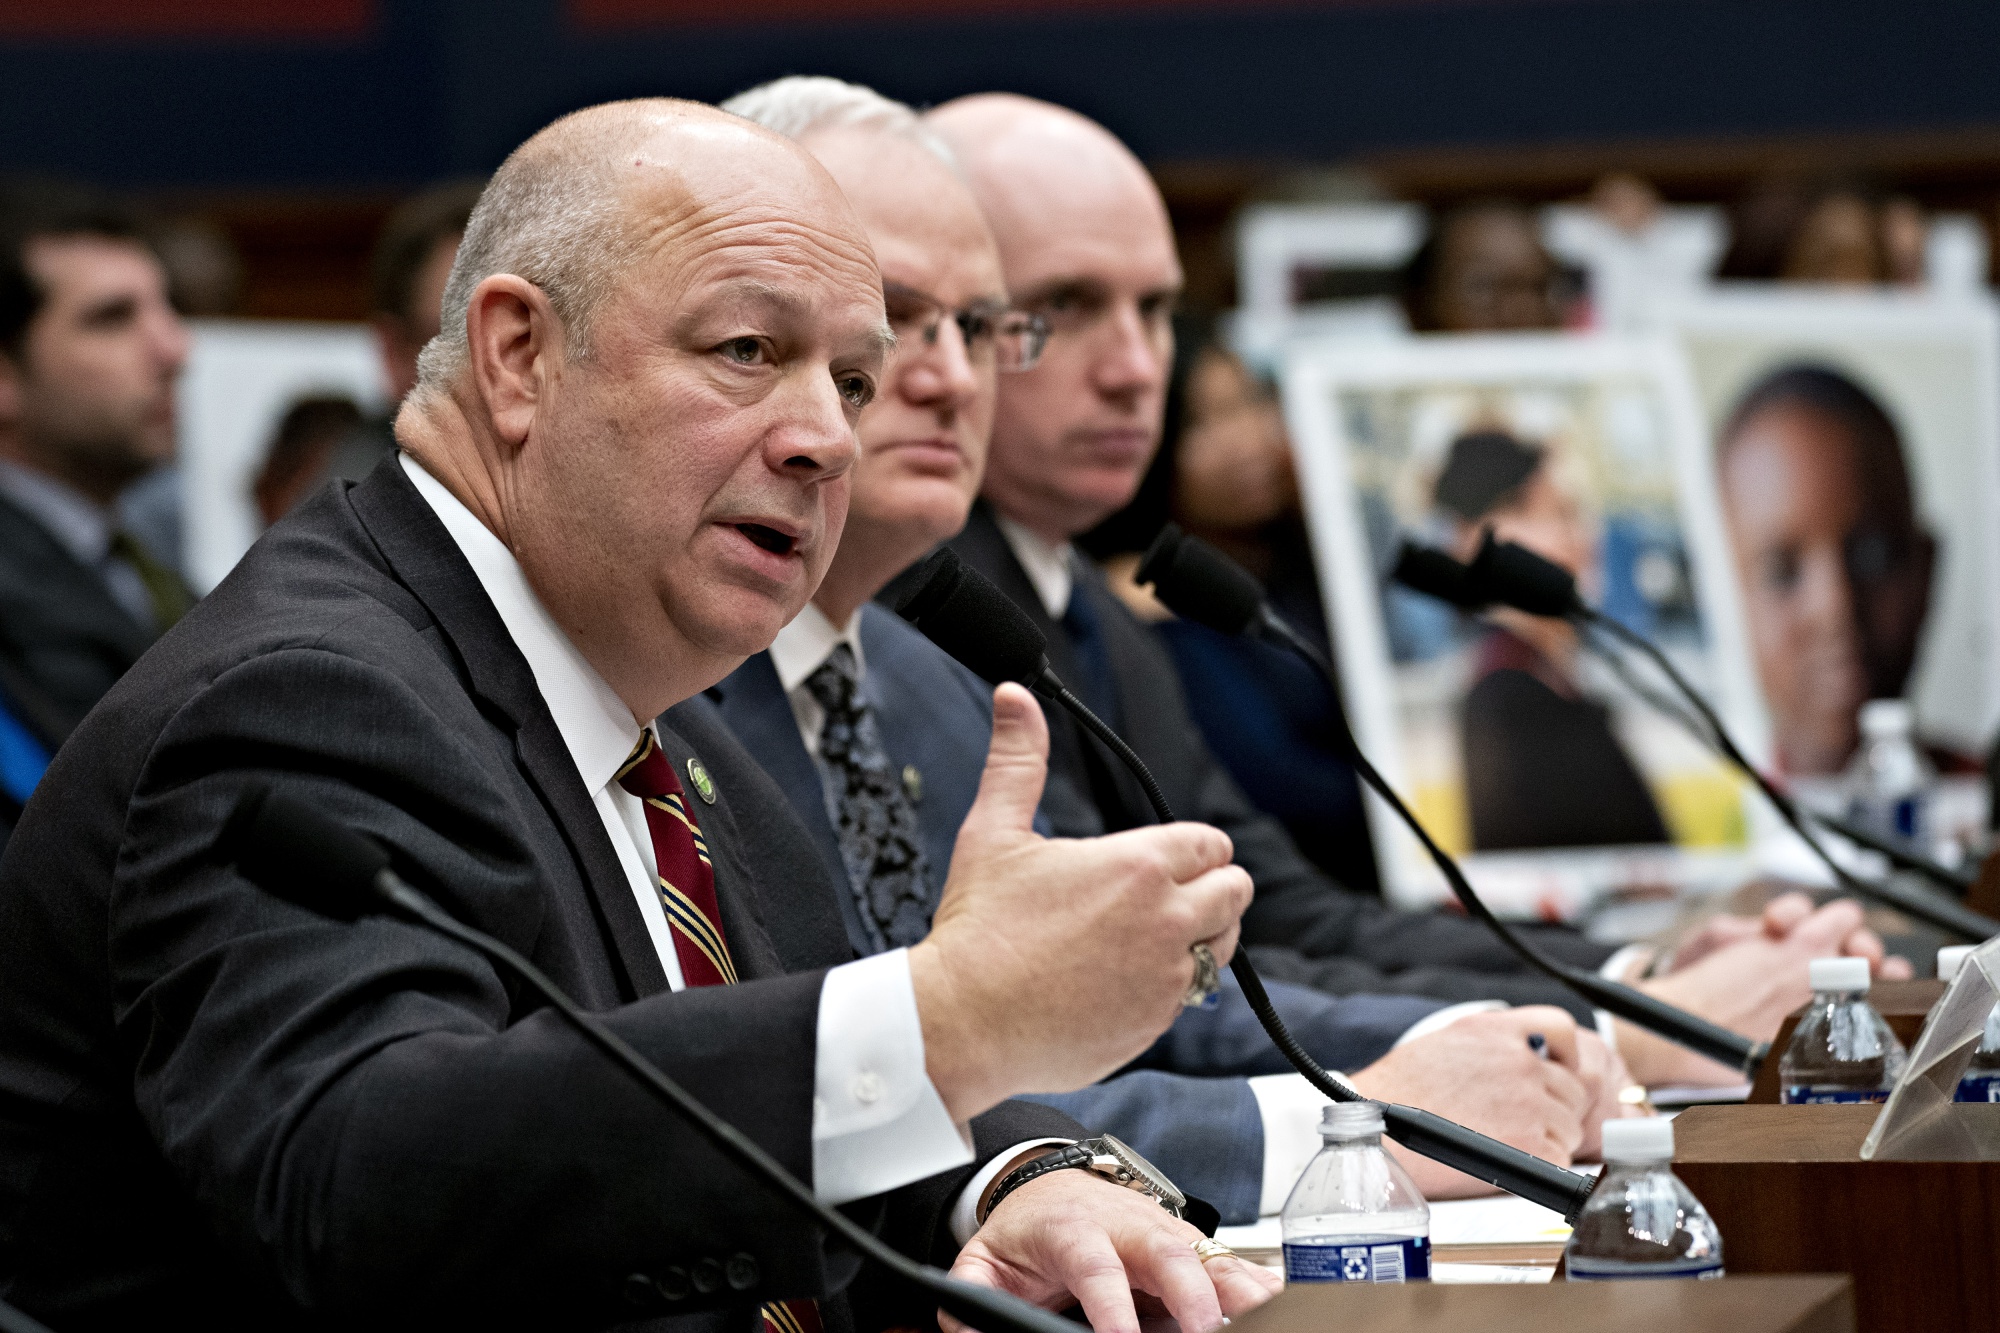 FAA Administrator Stephen Dickson speaks during a hearing on the Boeing Co. 737 Max aircraft in Washington on&nbsp;Dec. 11.&nbsp;